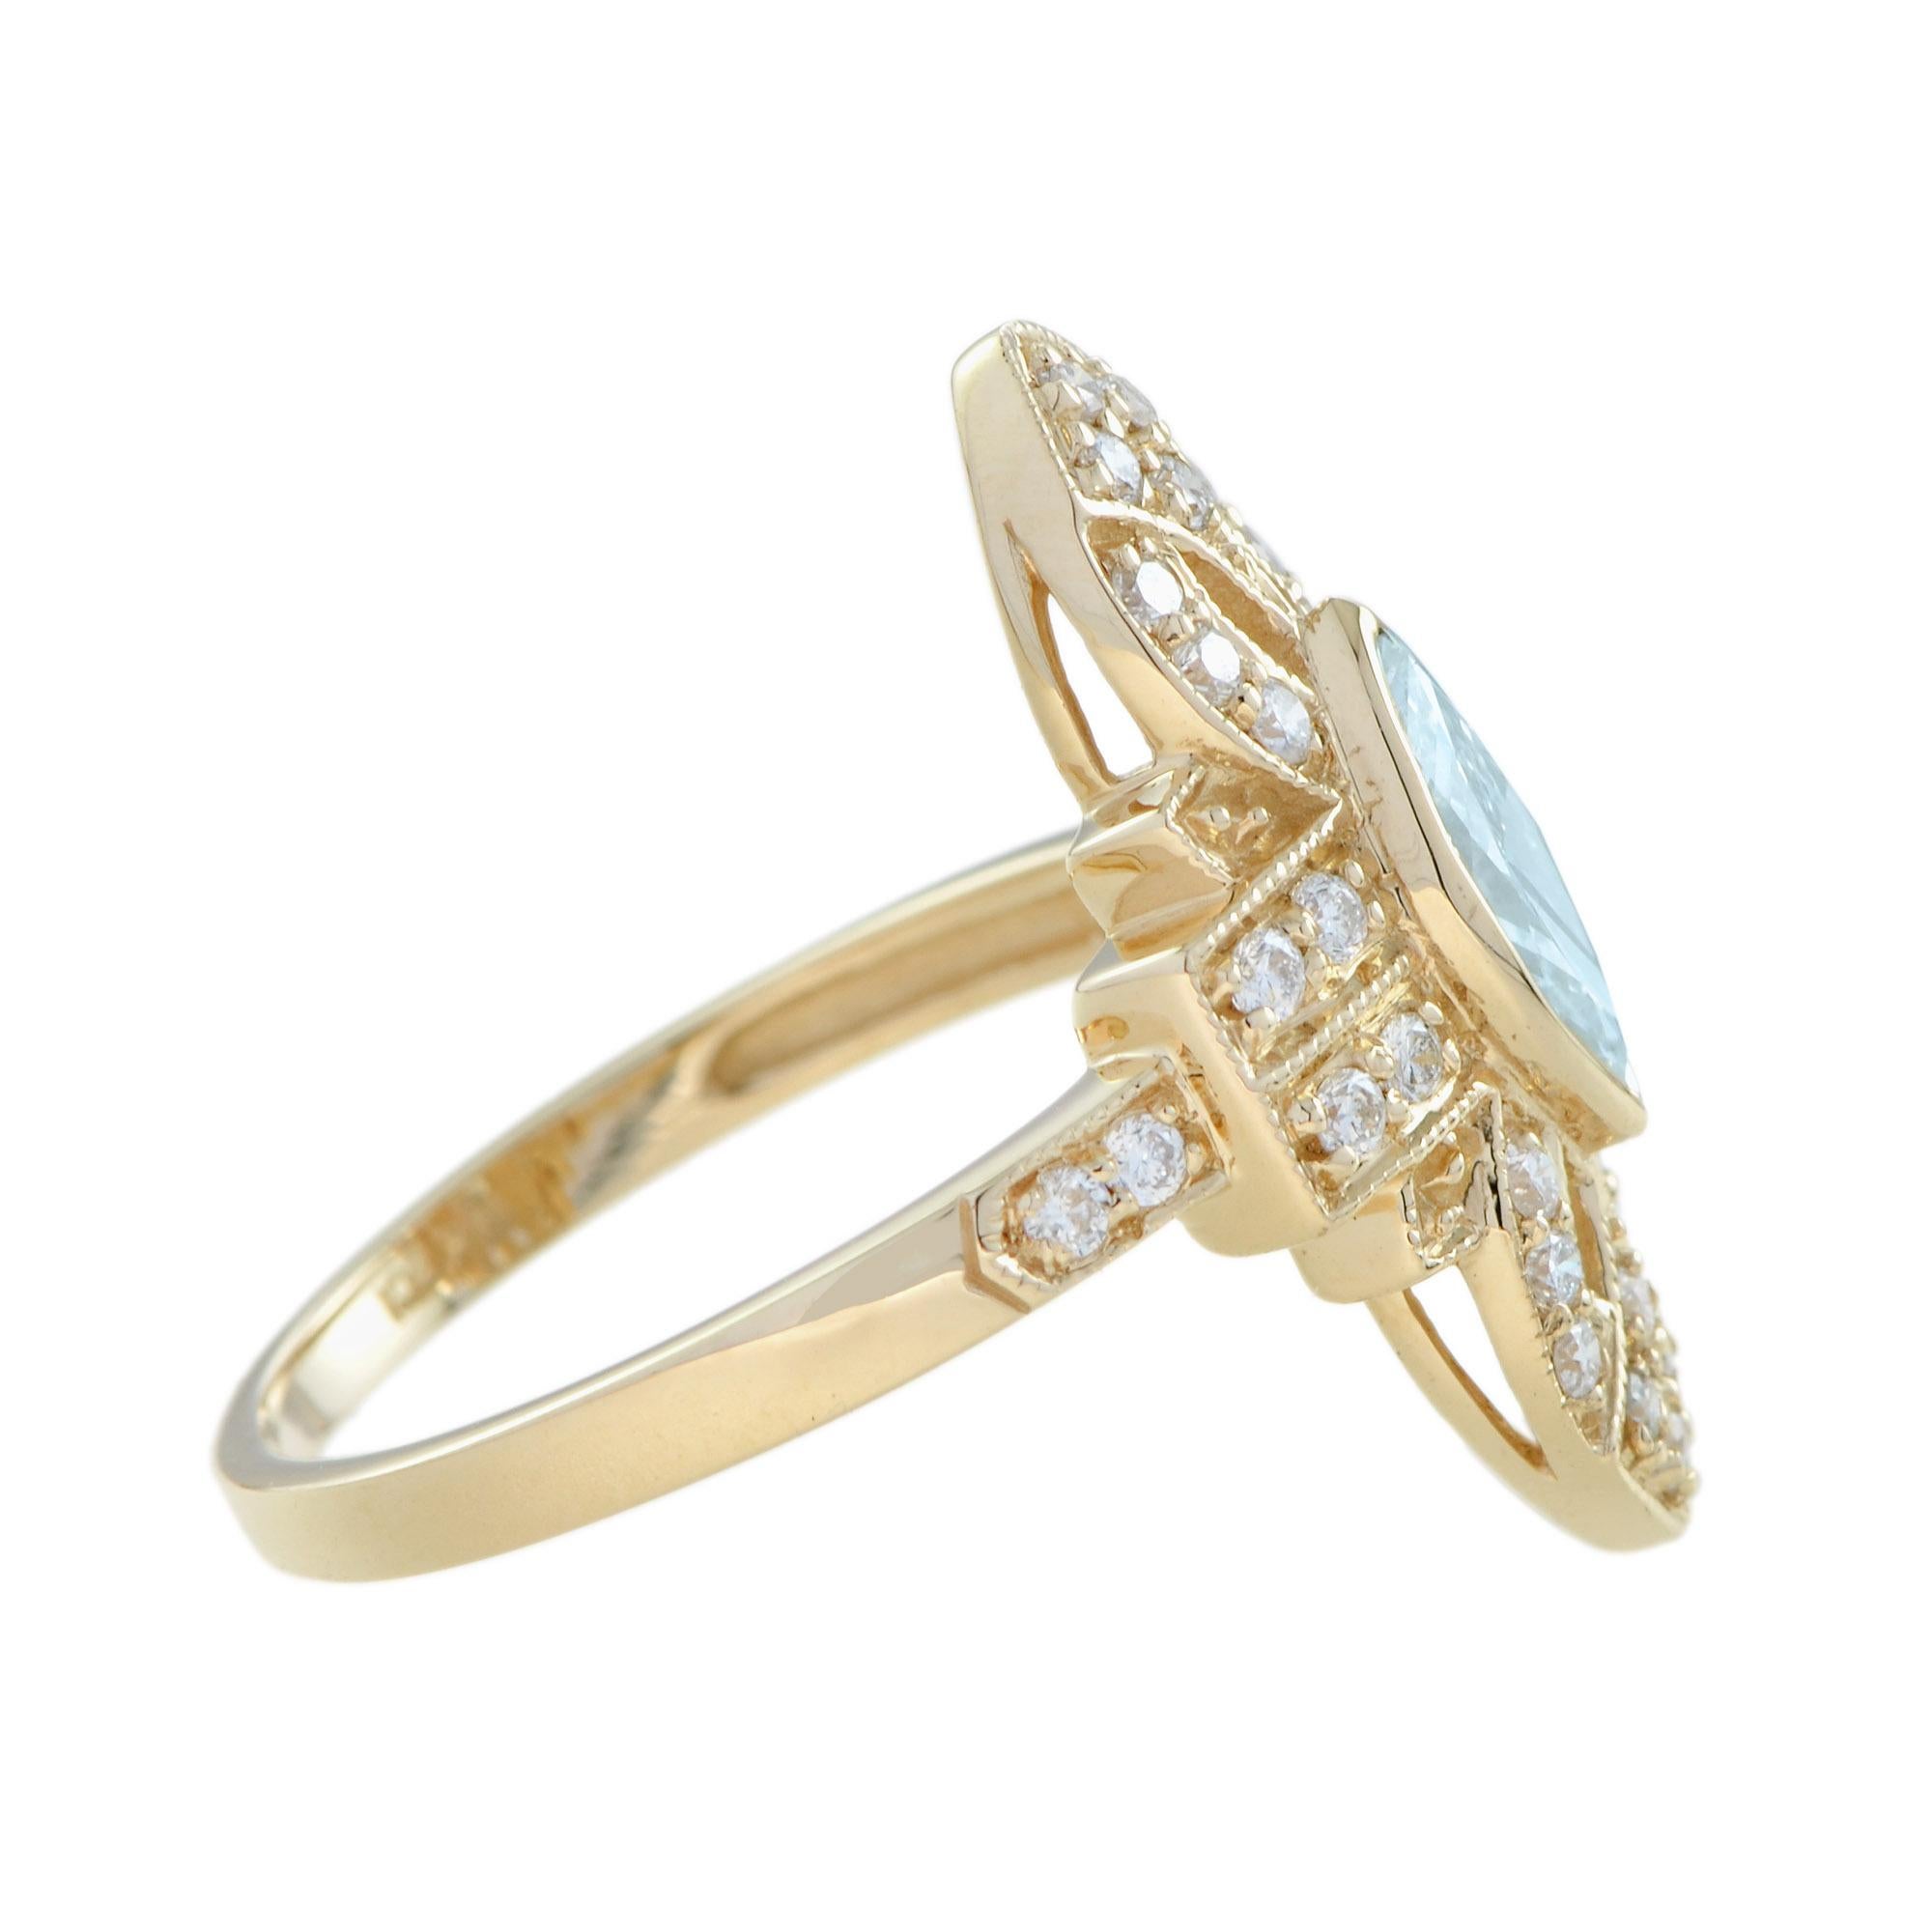 For Sale:  Aquamarine and Diamond Art Deco Style Marquise Shape Ring in 18K Yellow Gold 4